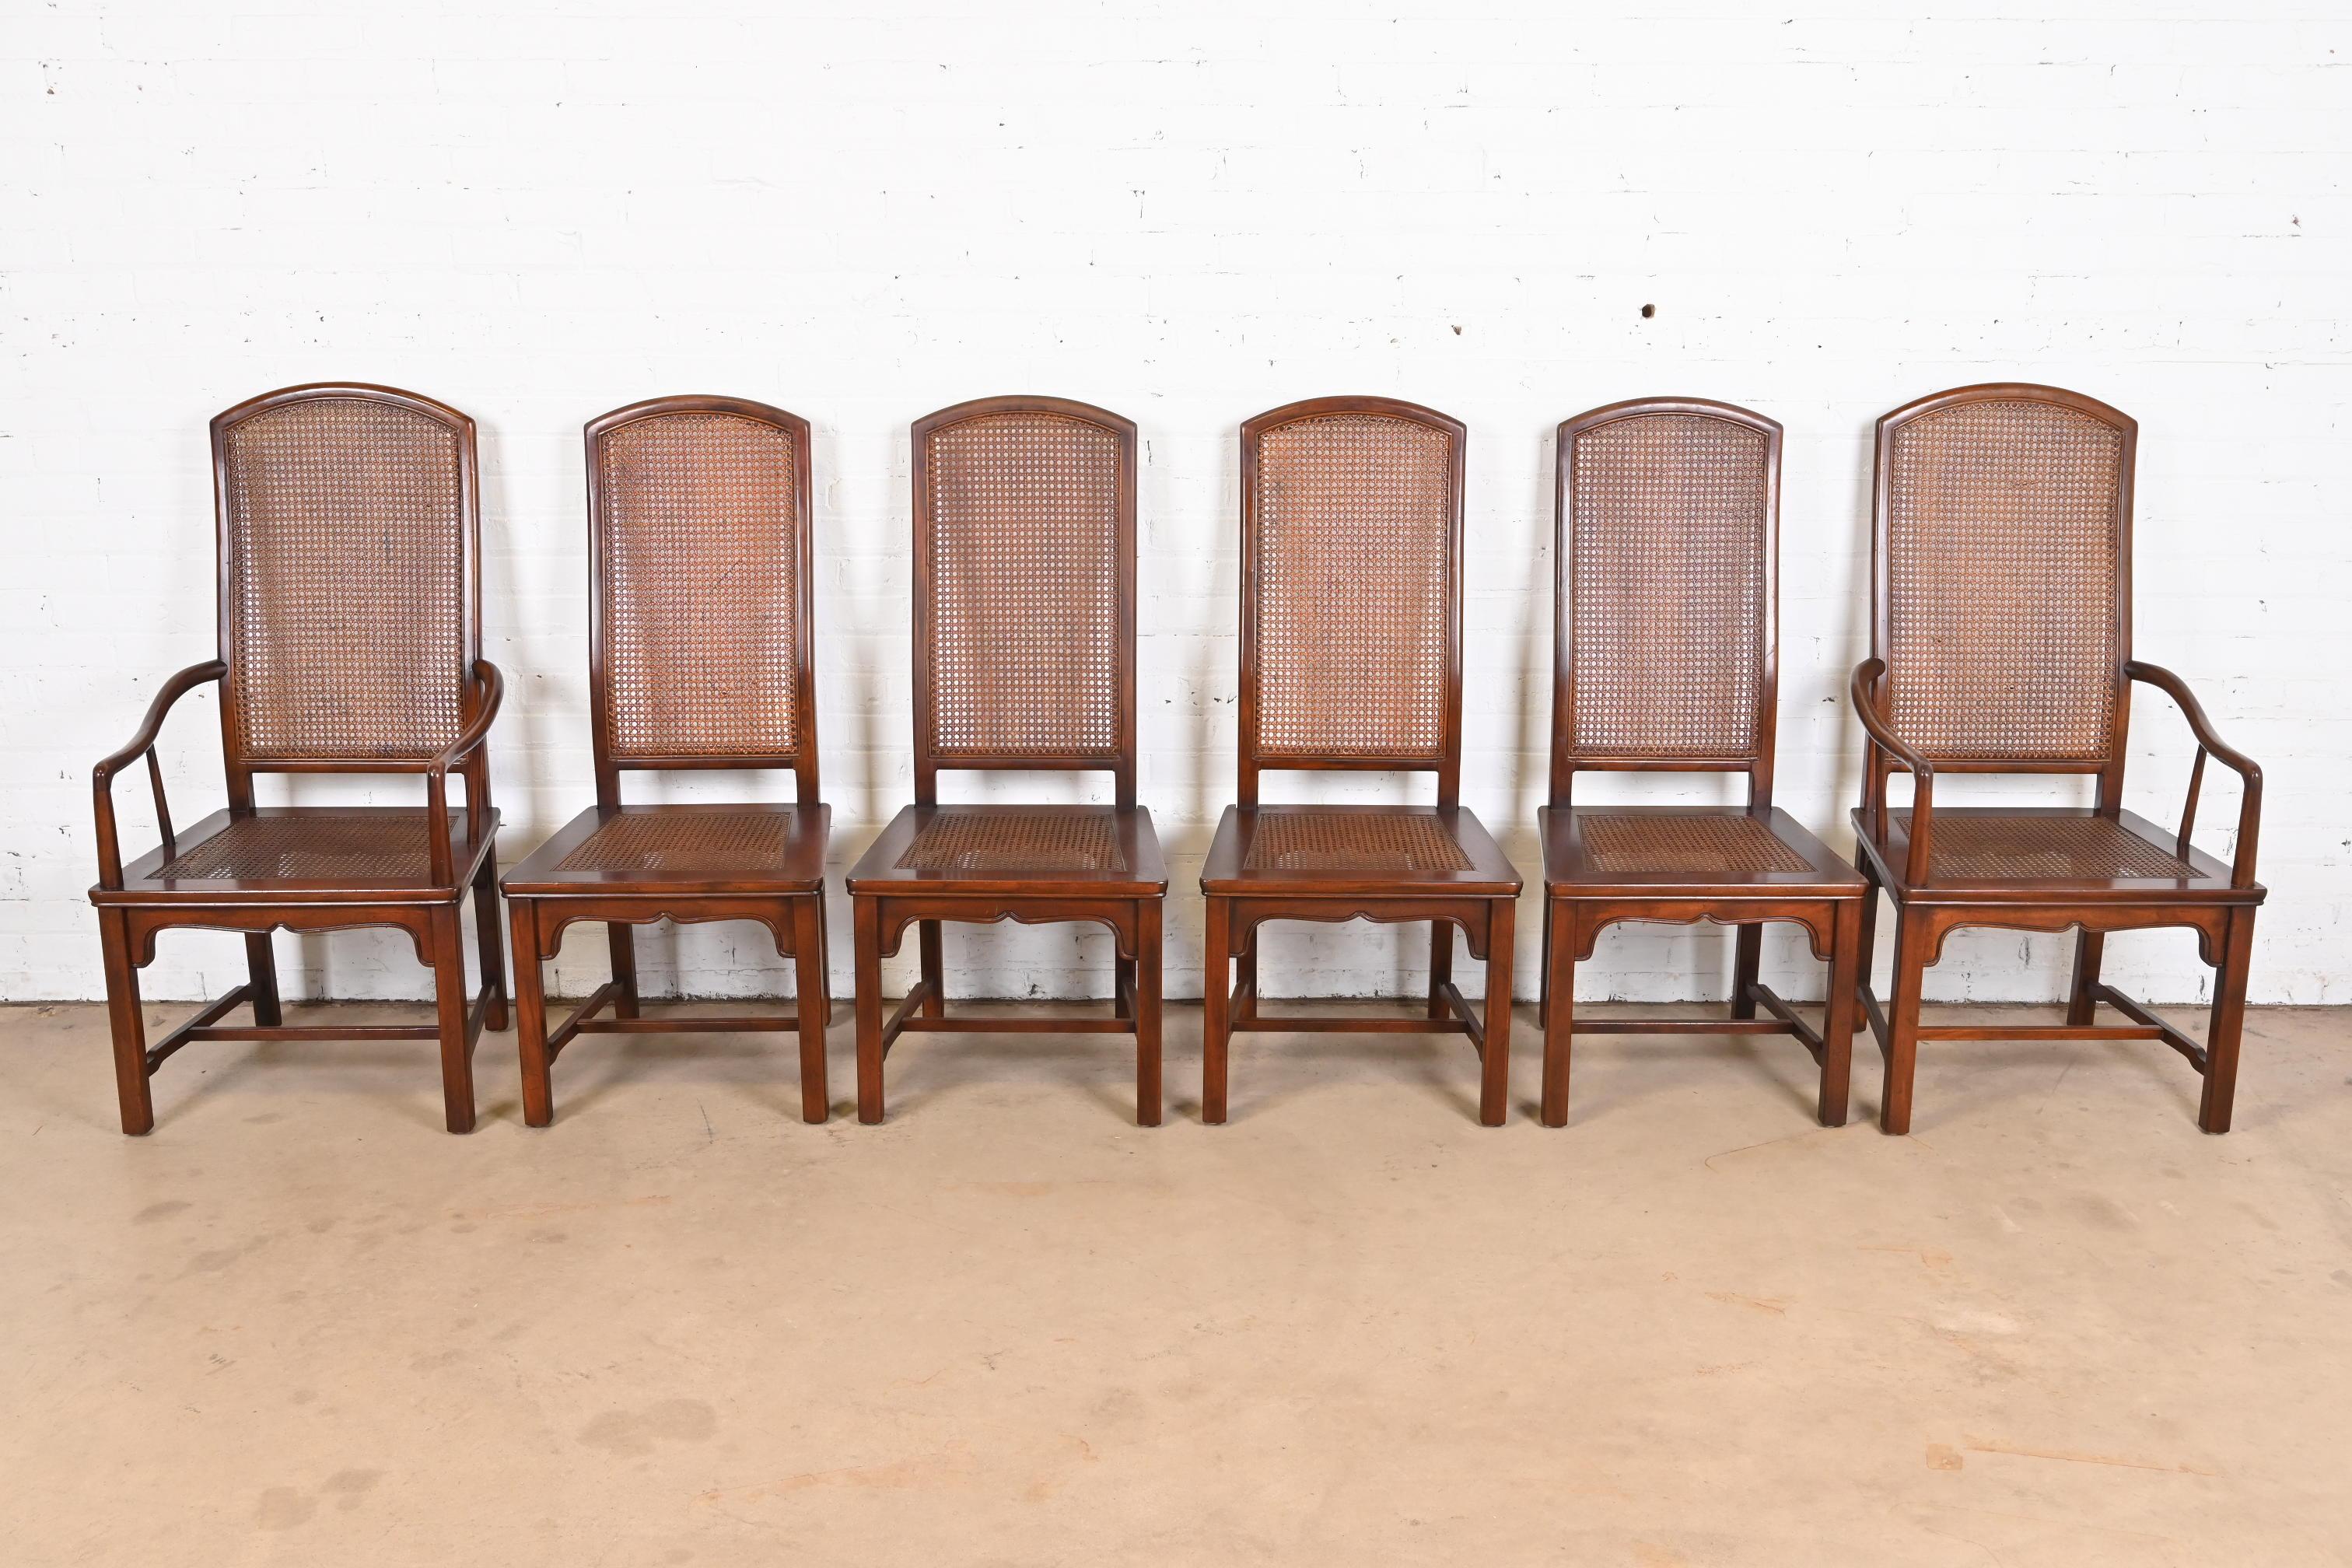 Henredon Hollywood Regency Chinoiserie Sculpted Mahogany Dining Chairs, Set of 6 For Sale 2